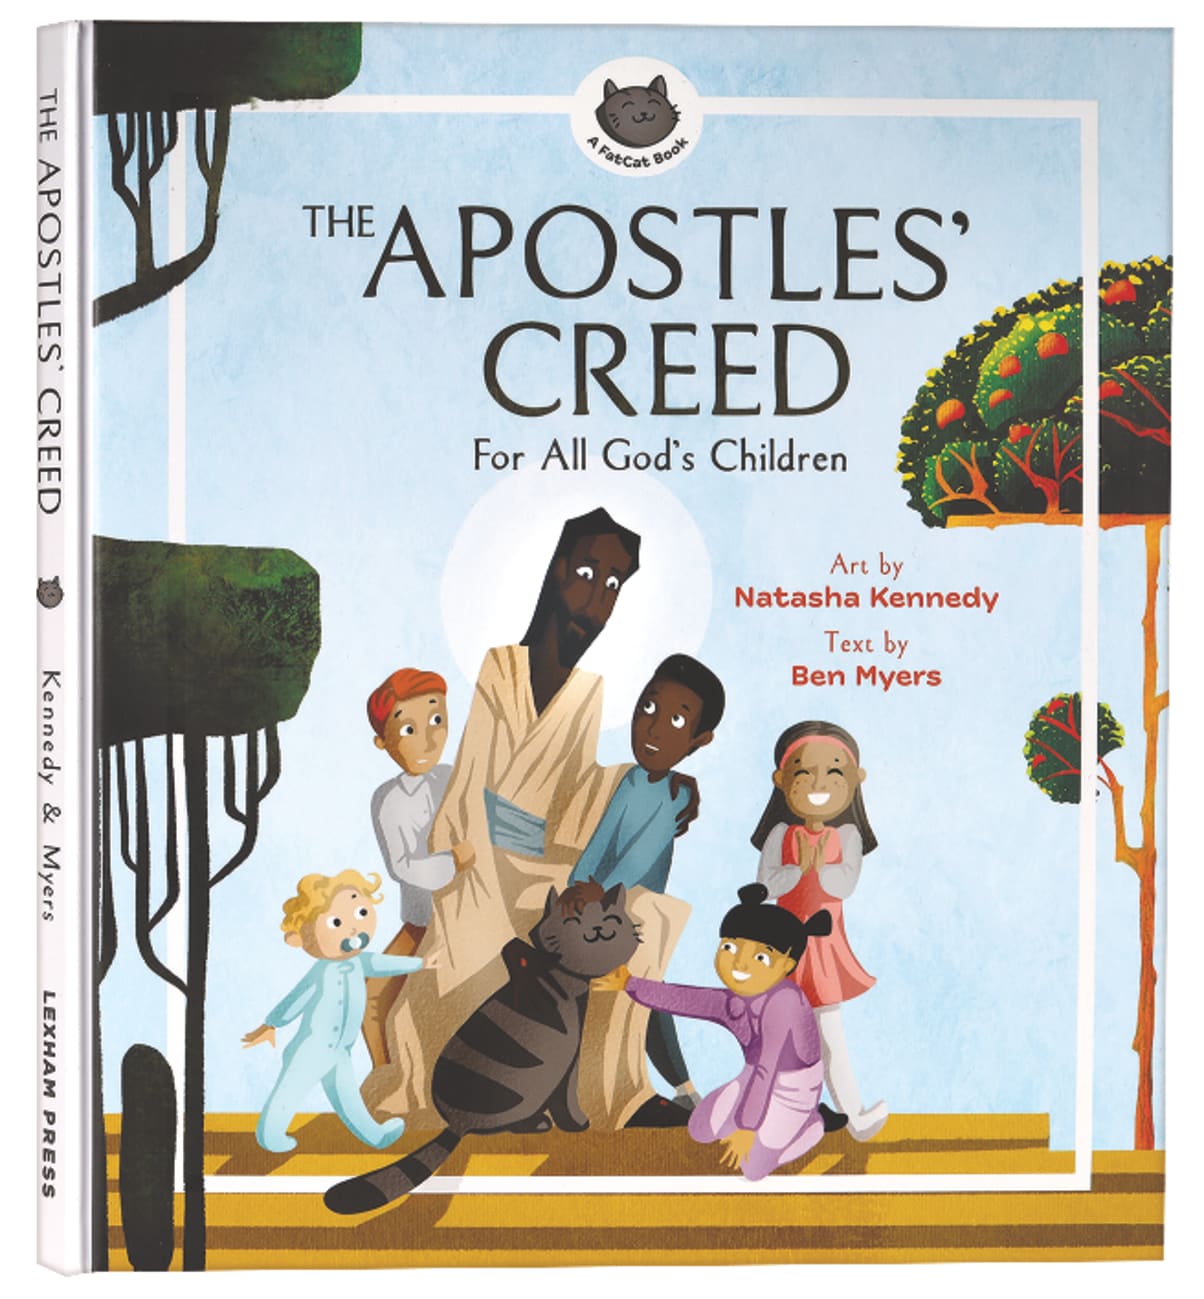 FACA: APOSTLES' CREED FOR ALL GOD'S CHILDREN THE